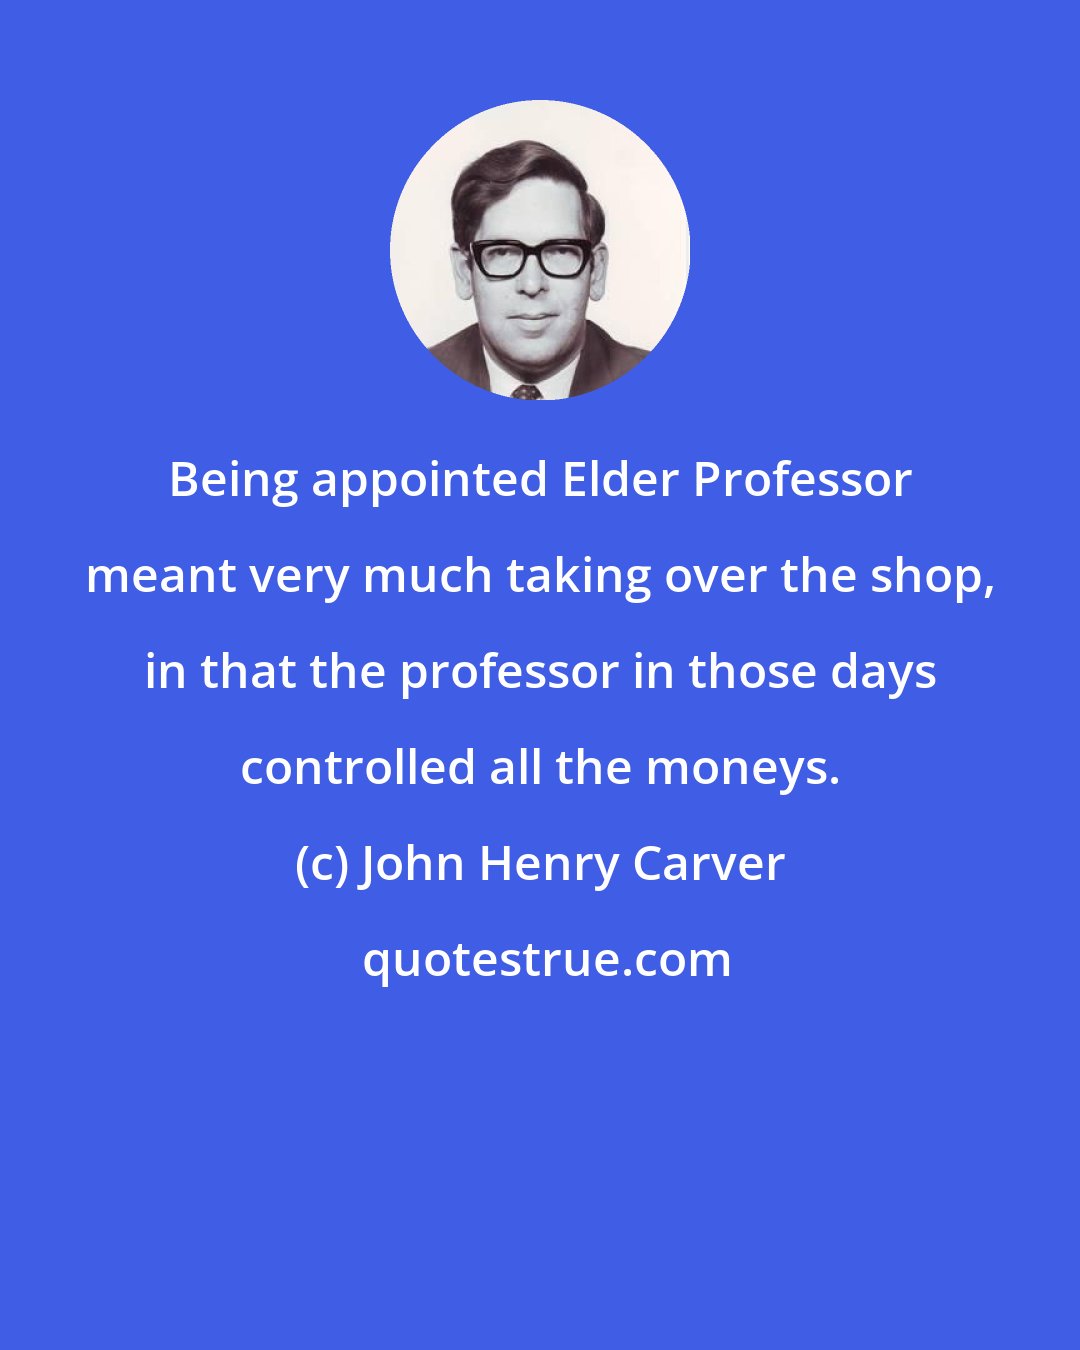 John Henry Carver: Being appointed Elder Professor meant very much taking over the shop, in that the professor in those days controlled all the moneys.